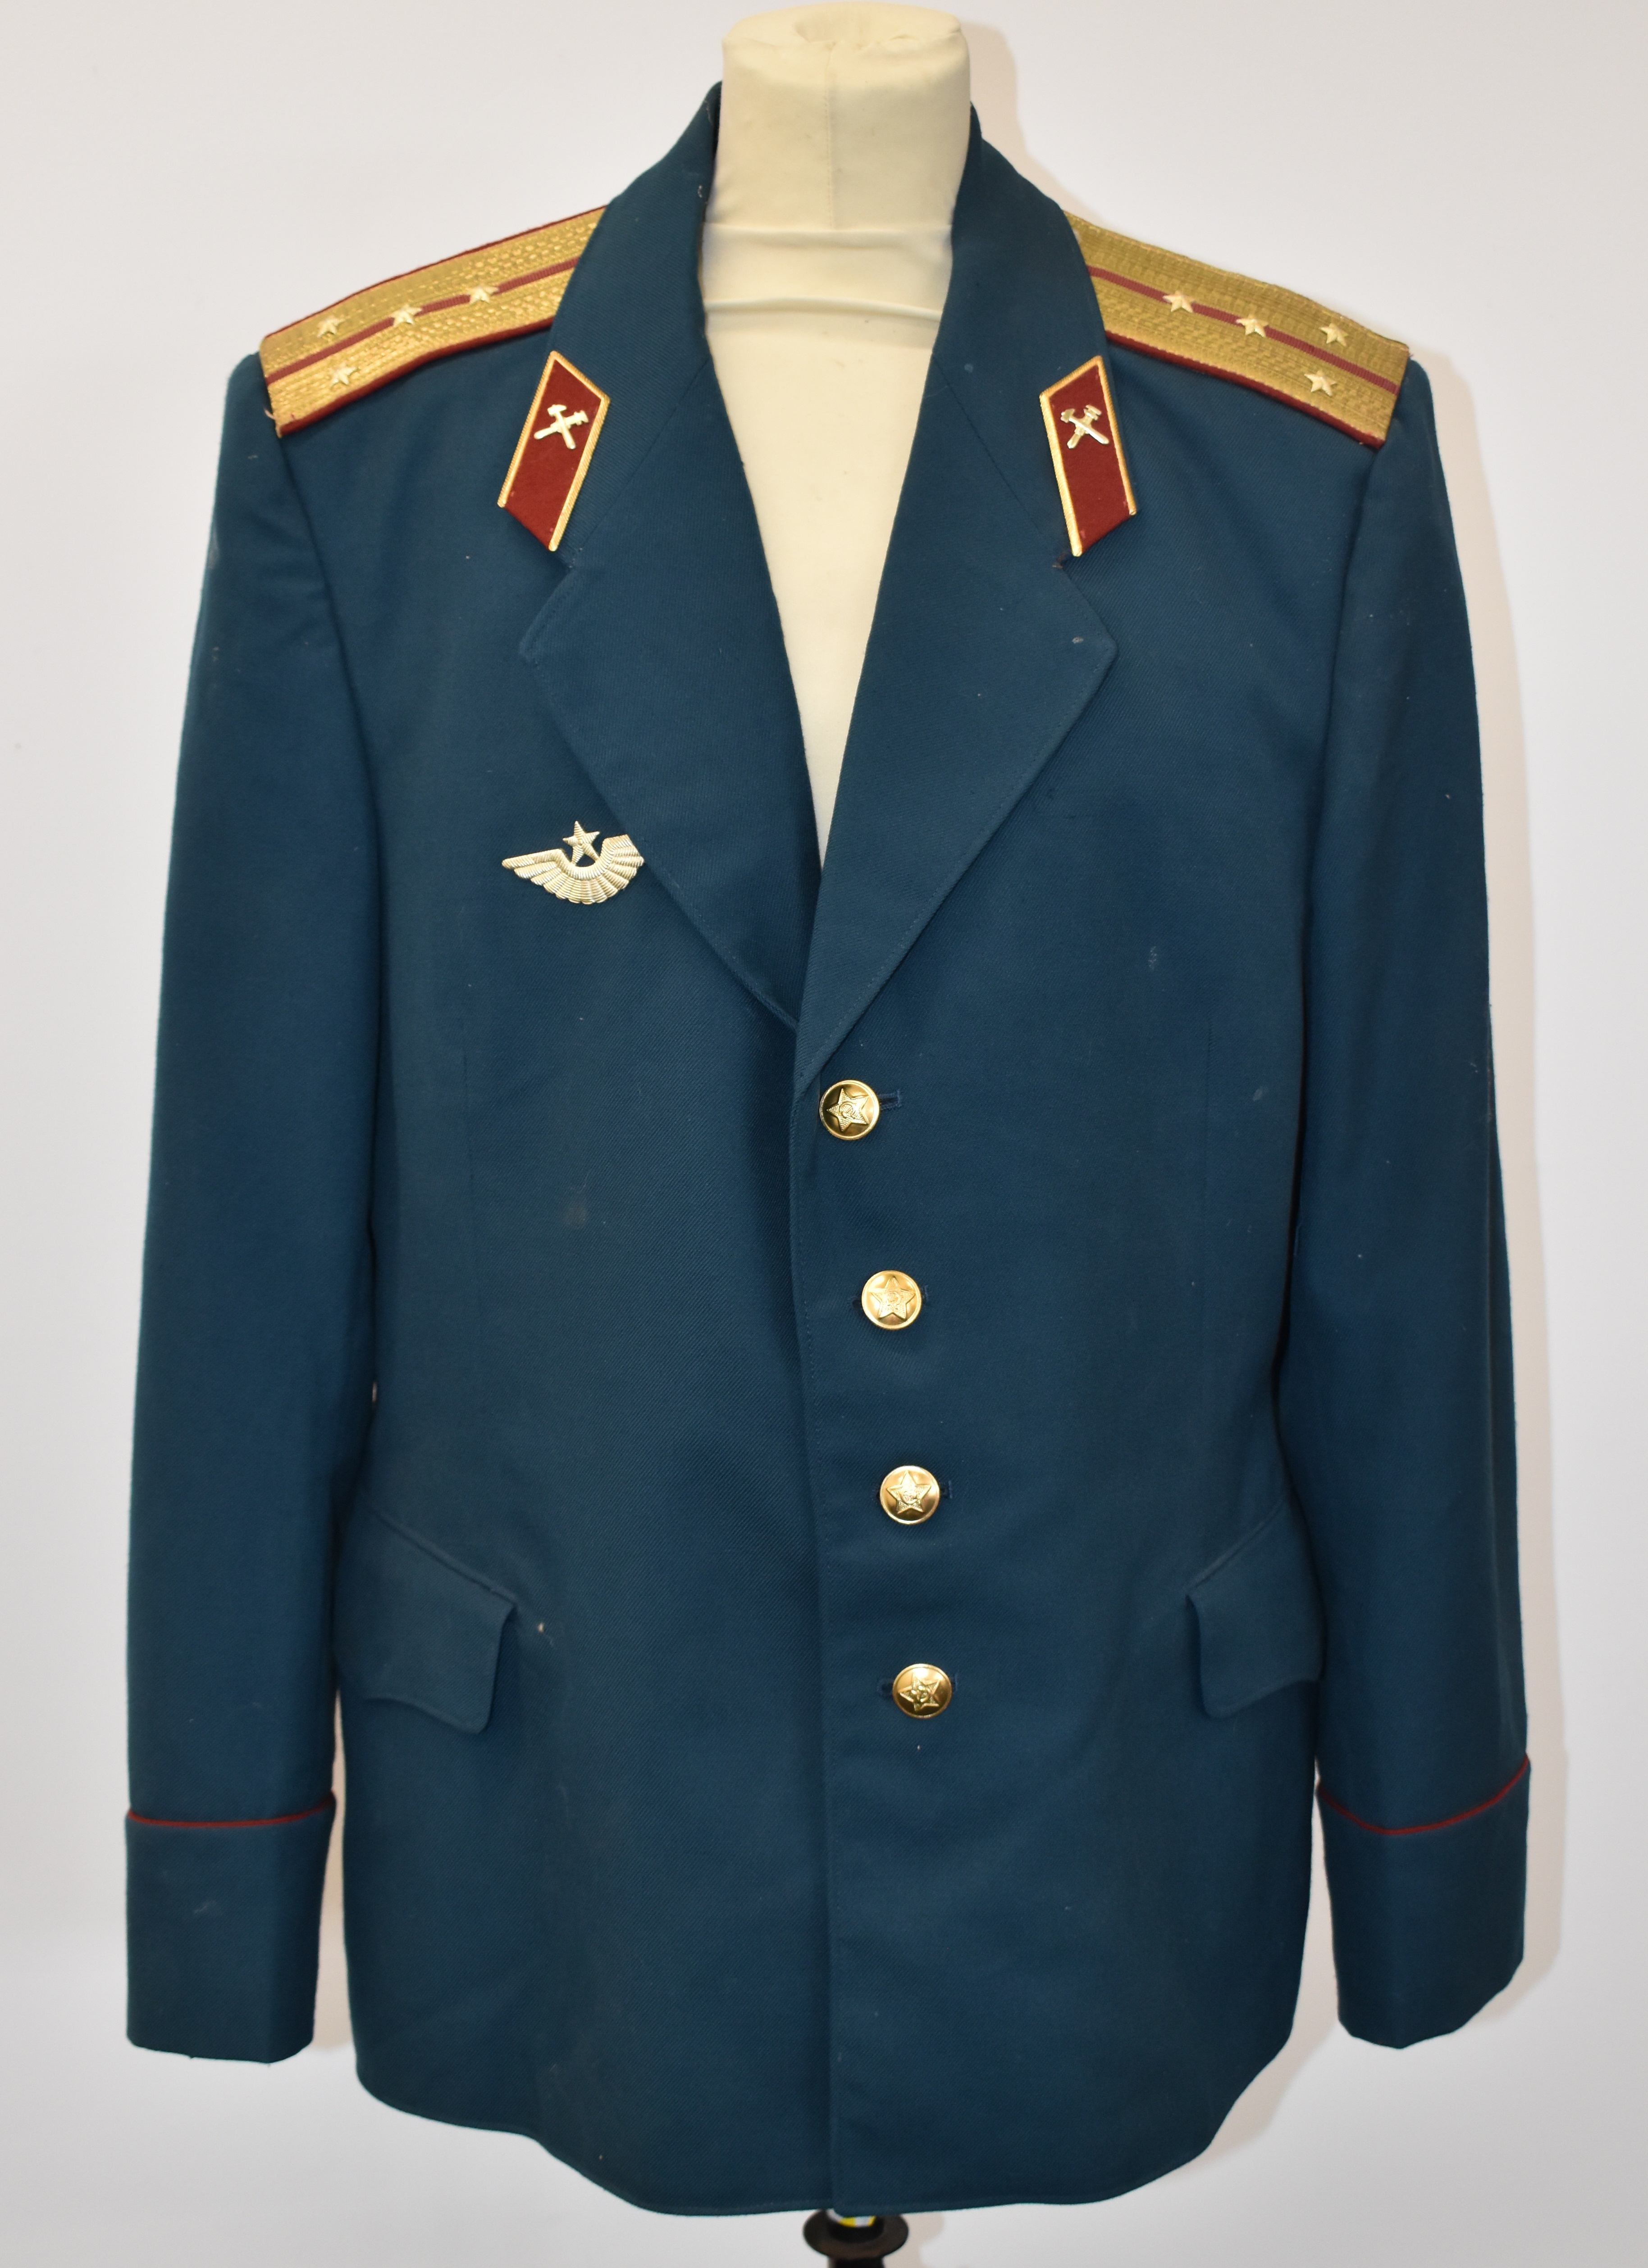 Russian Air Force Cold War uniform comprising tunic and trousers with insignia - the vendor